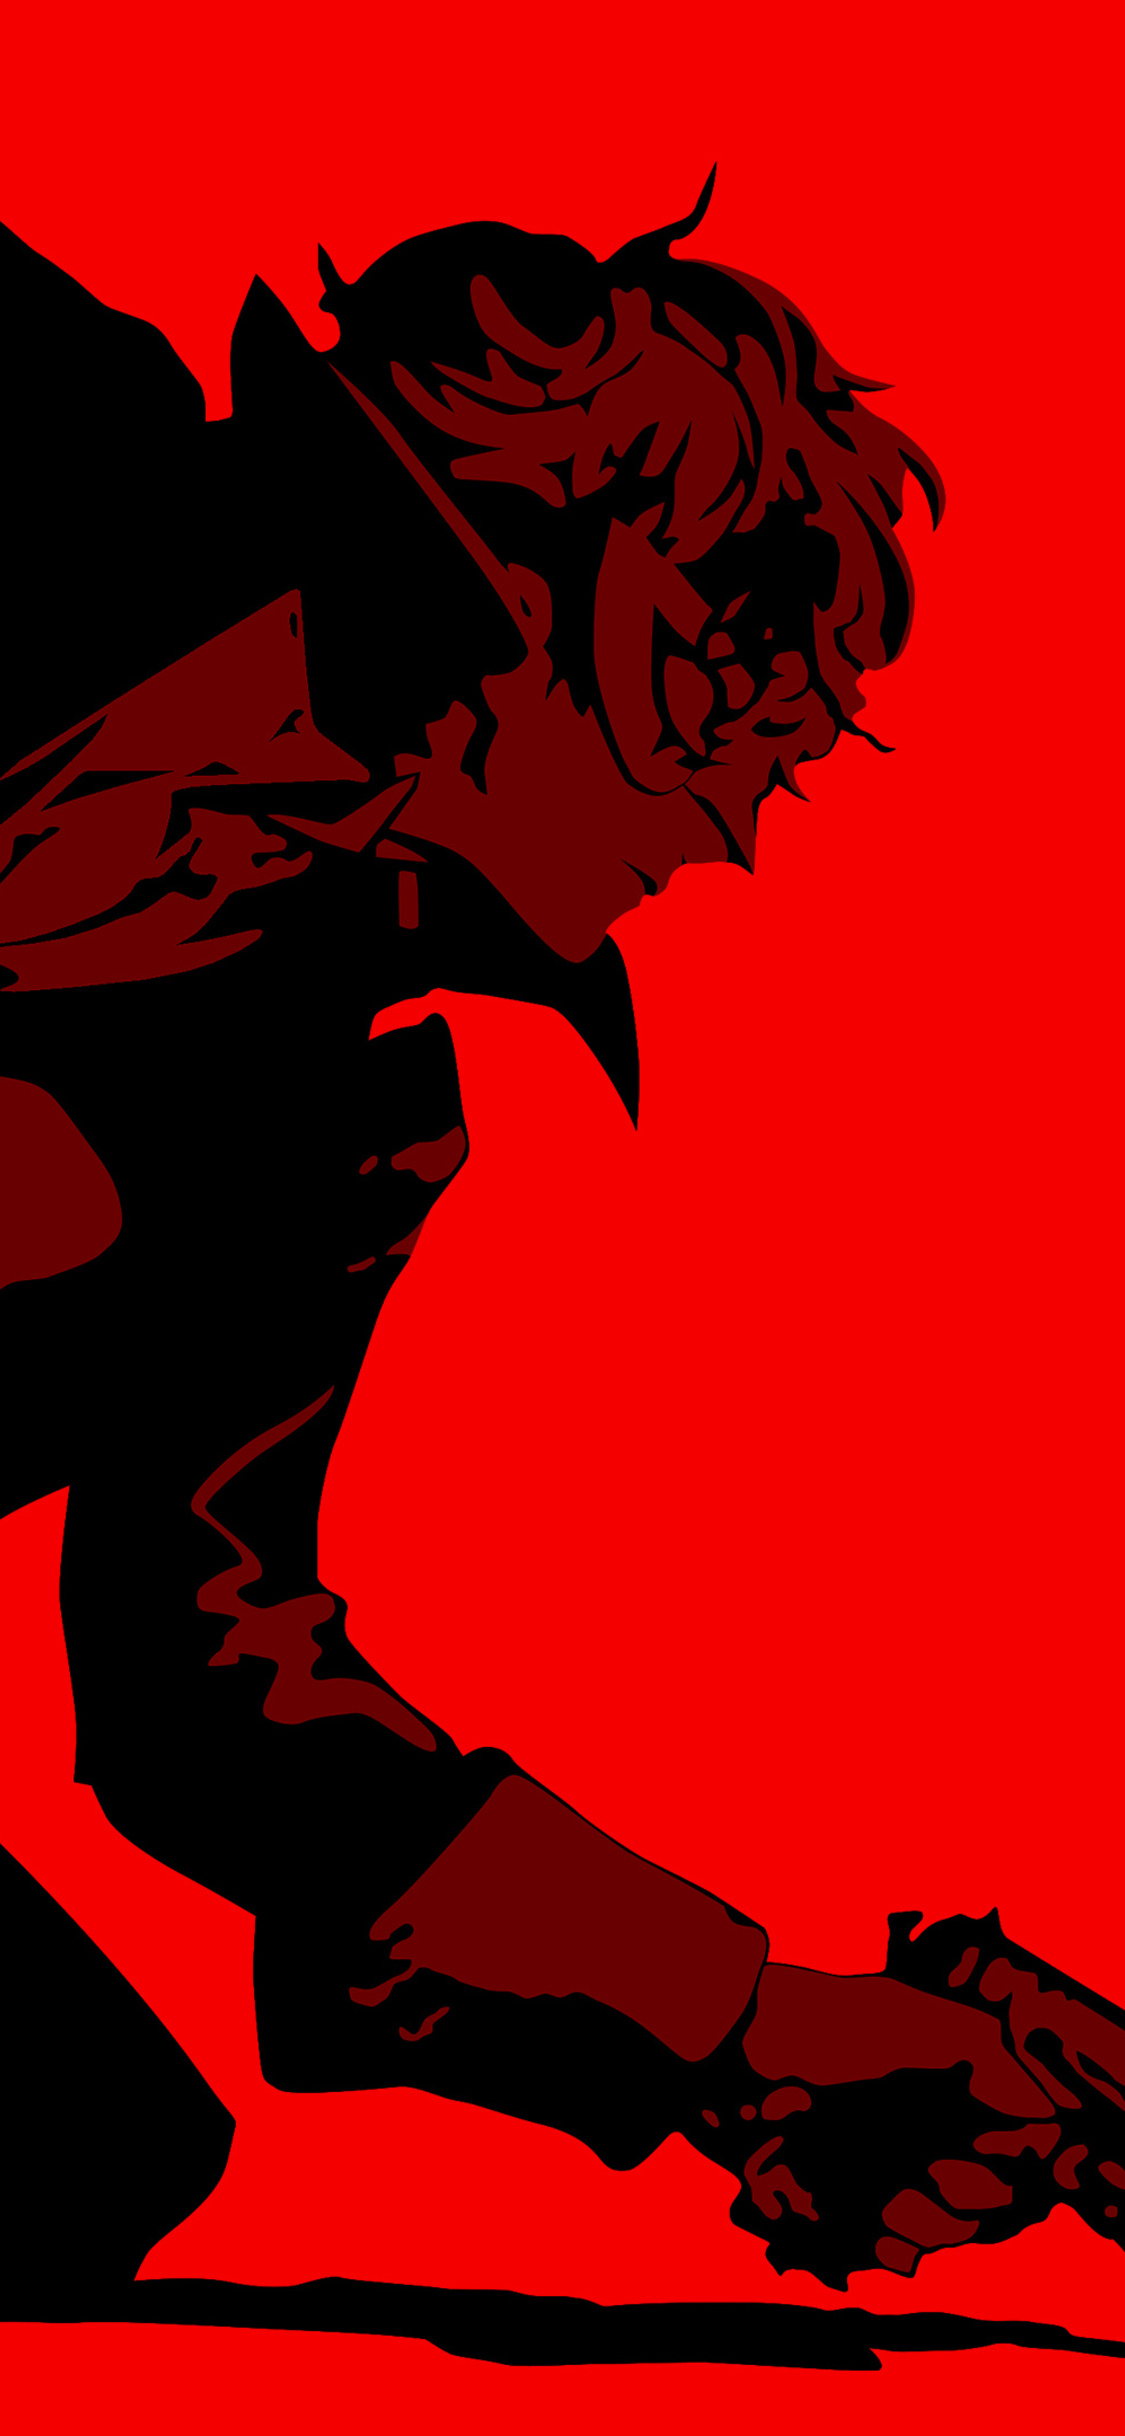 1125x2436 Persona 5 4k Iphone XSIphone 10Iphone X HD 4k Wallpapers  Images Backgrounds Photos and Pictures